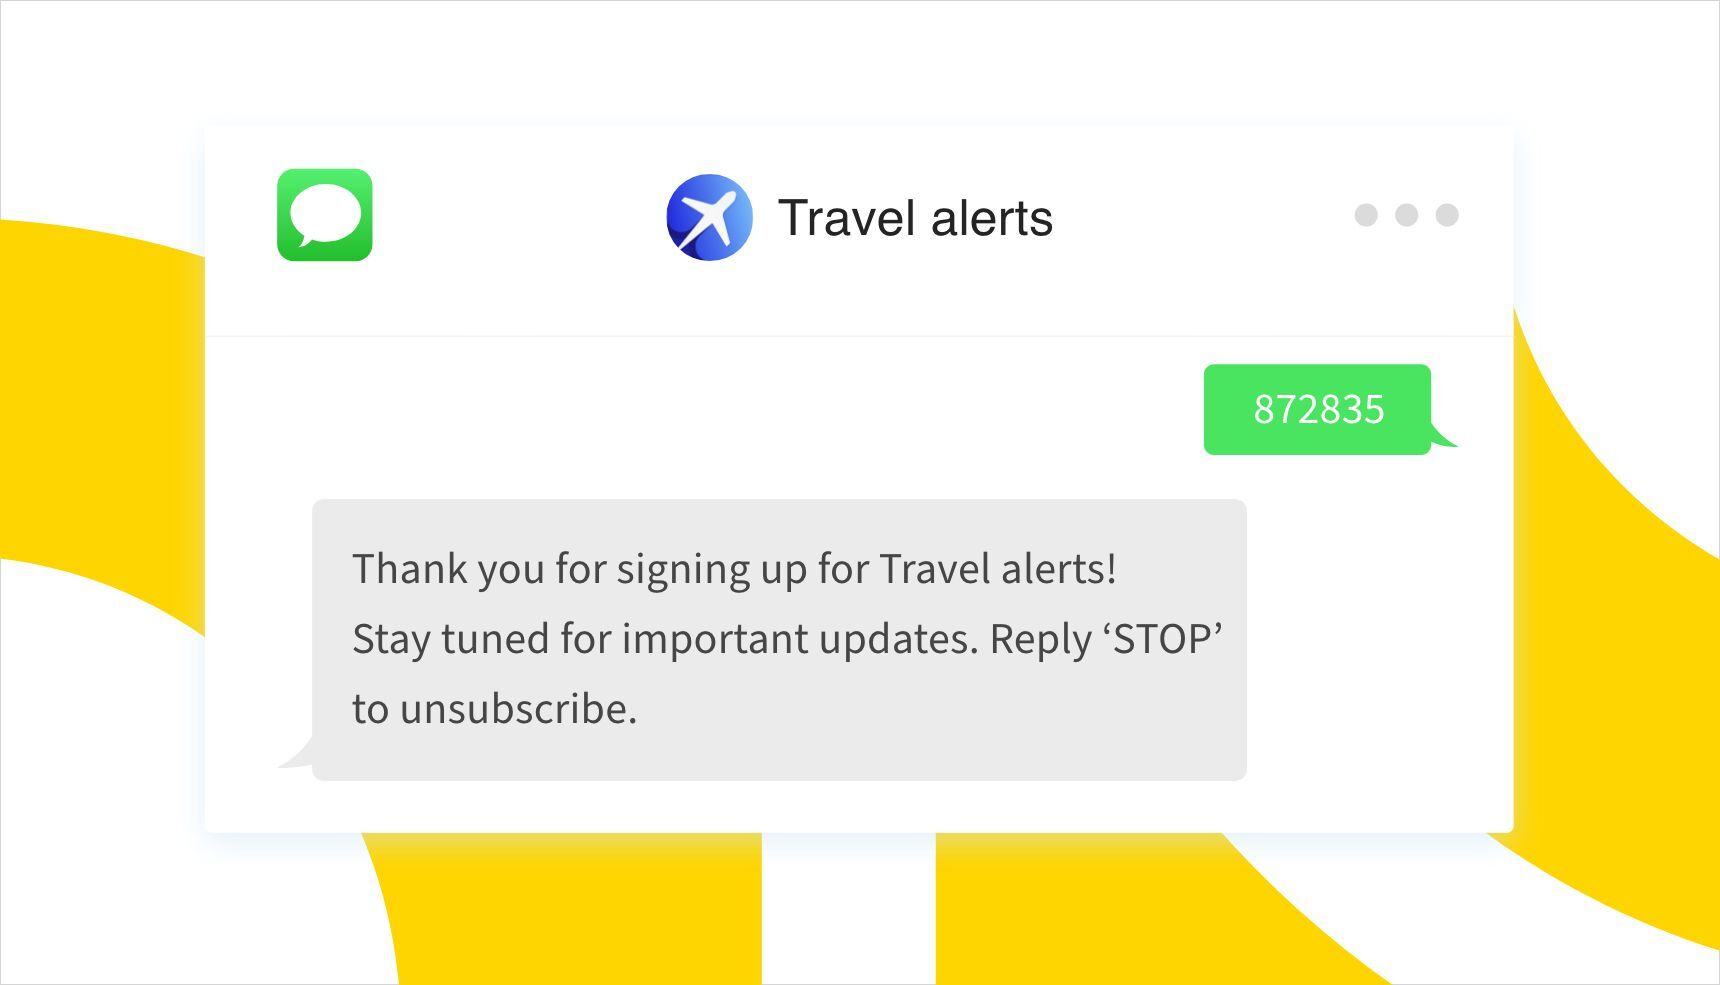 A text message using a vanity short code that signs customers up for travel alerts from a travel company.